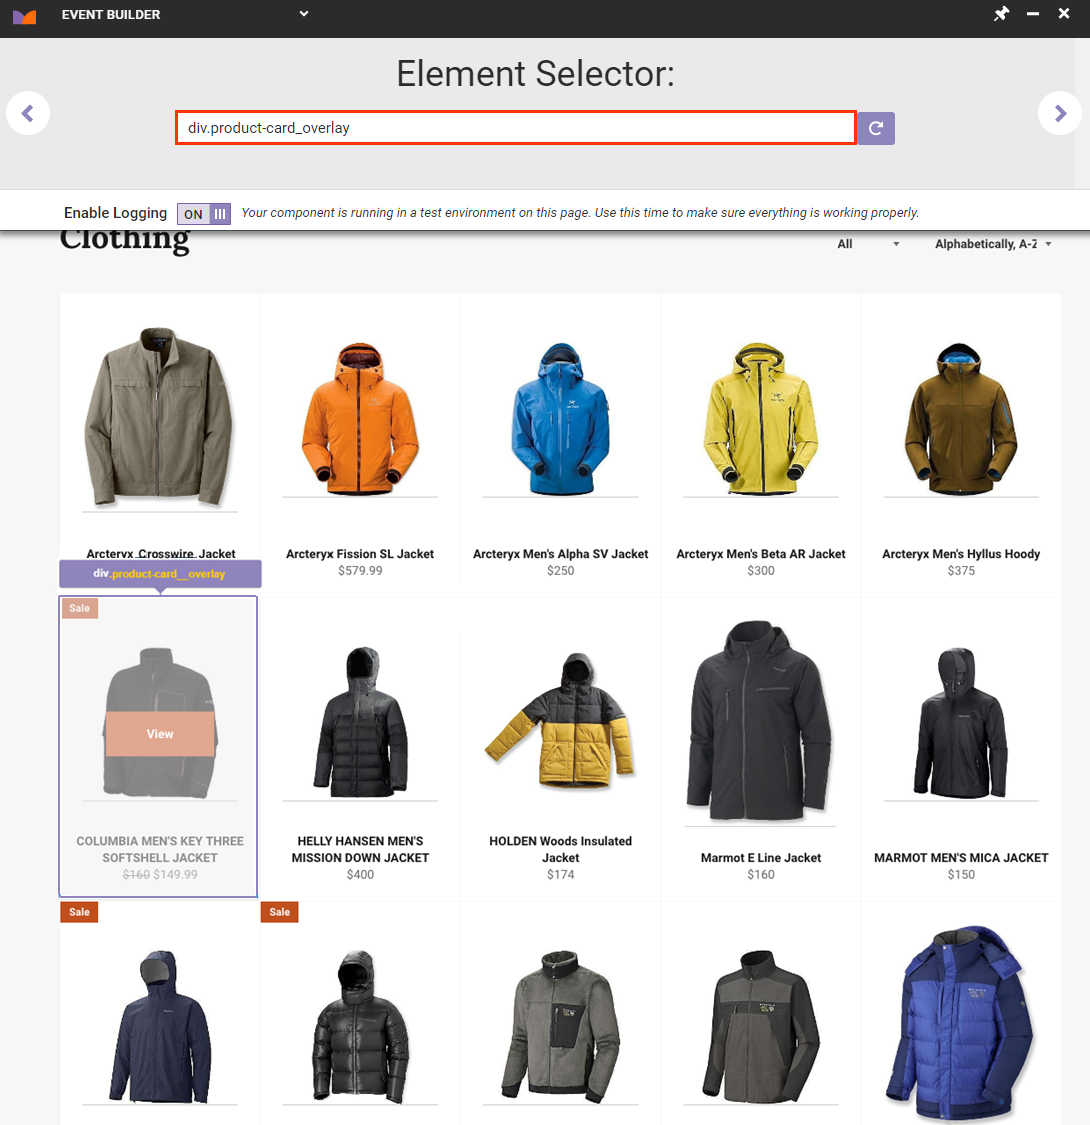 The Element Selector tool in Event Builder, with a container selected for a product on a product list page